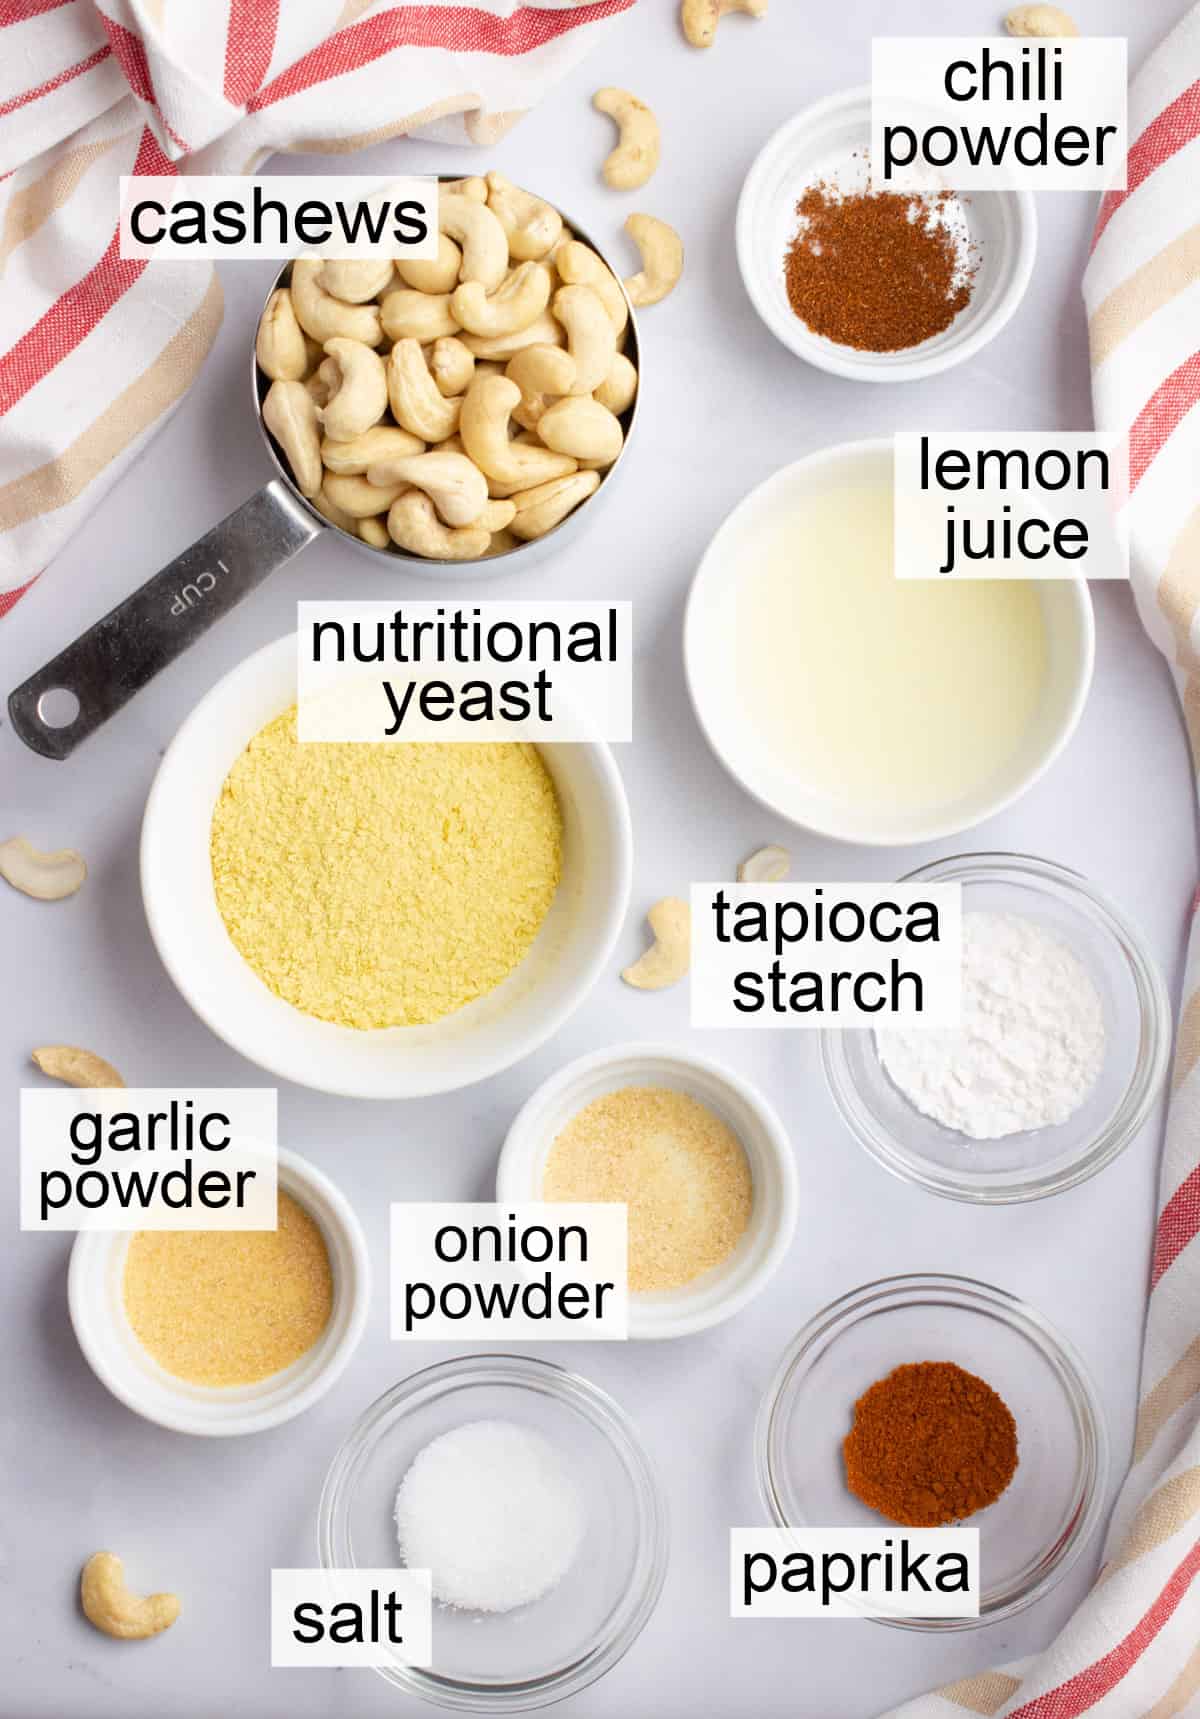 Small bowls of ingredients needed to make vegan nacho cheese sauce.